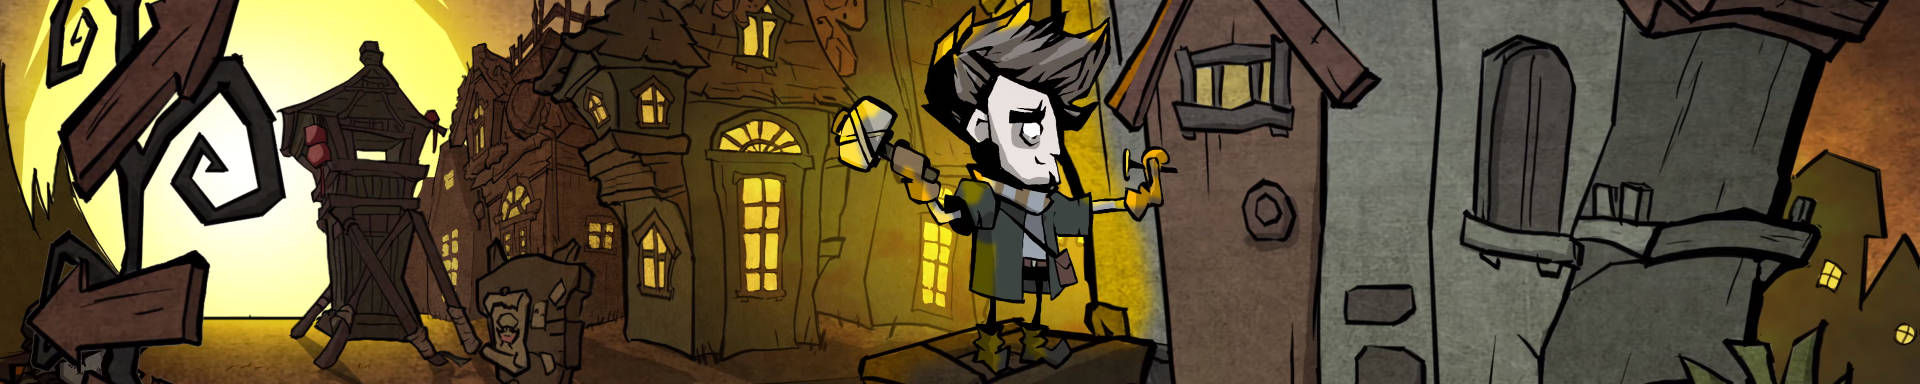 Don't Starve Newhome offline mode controller support slice